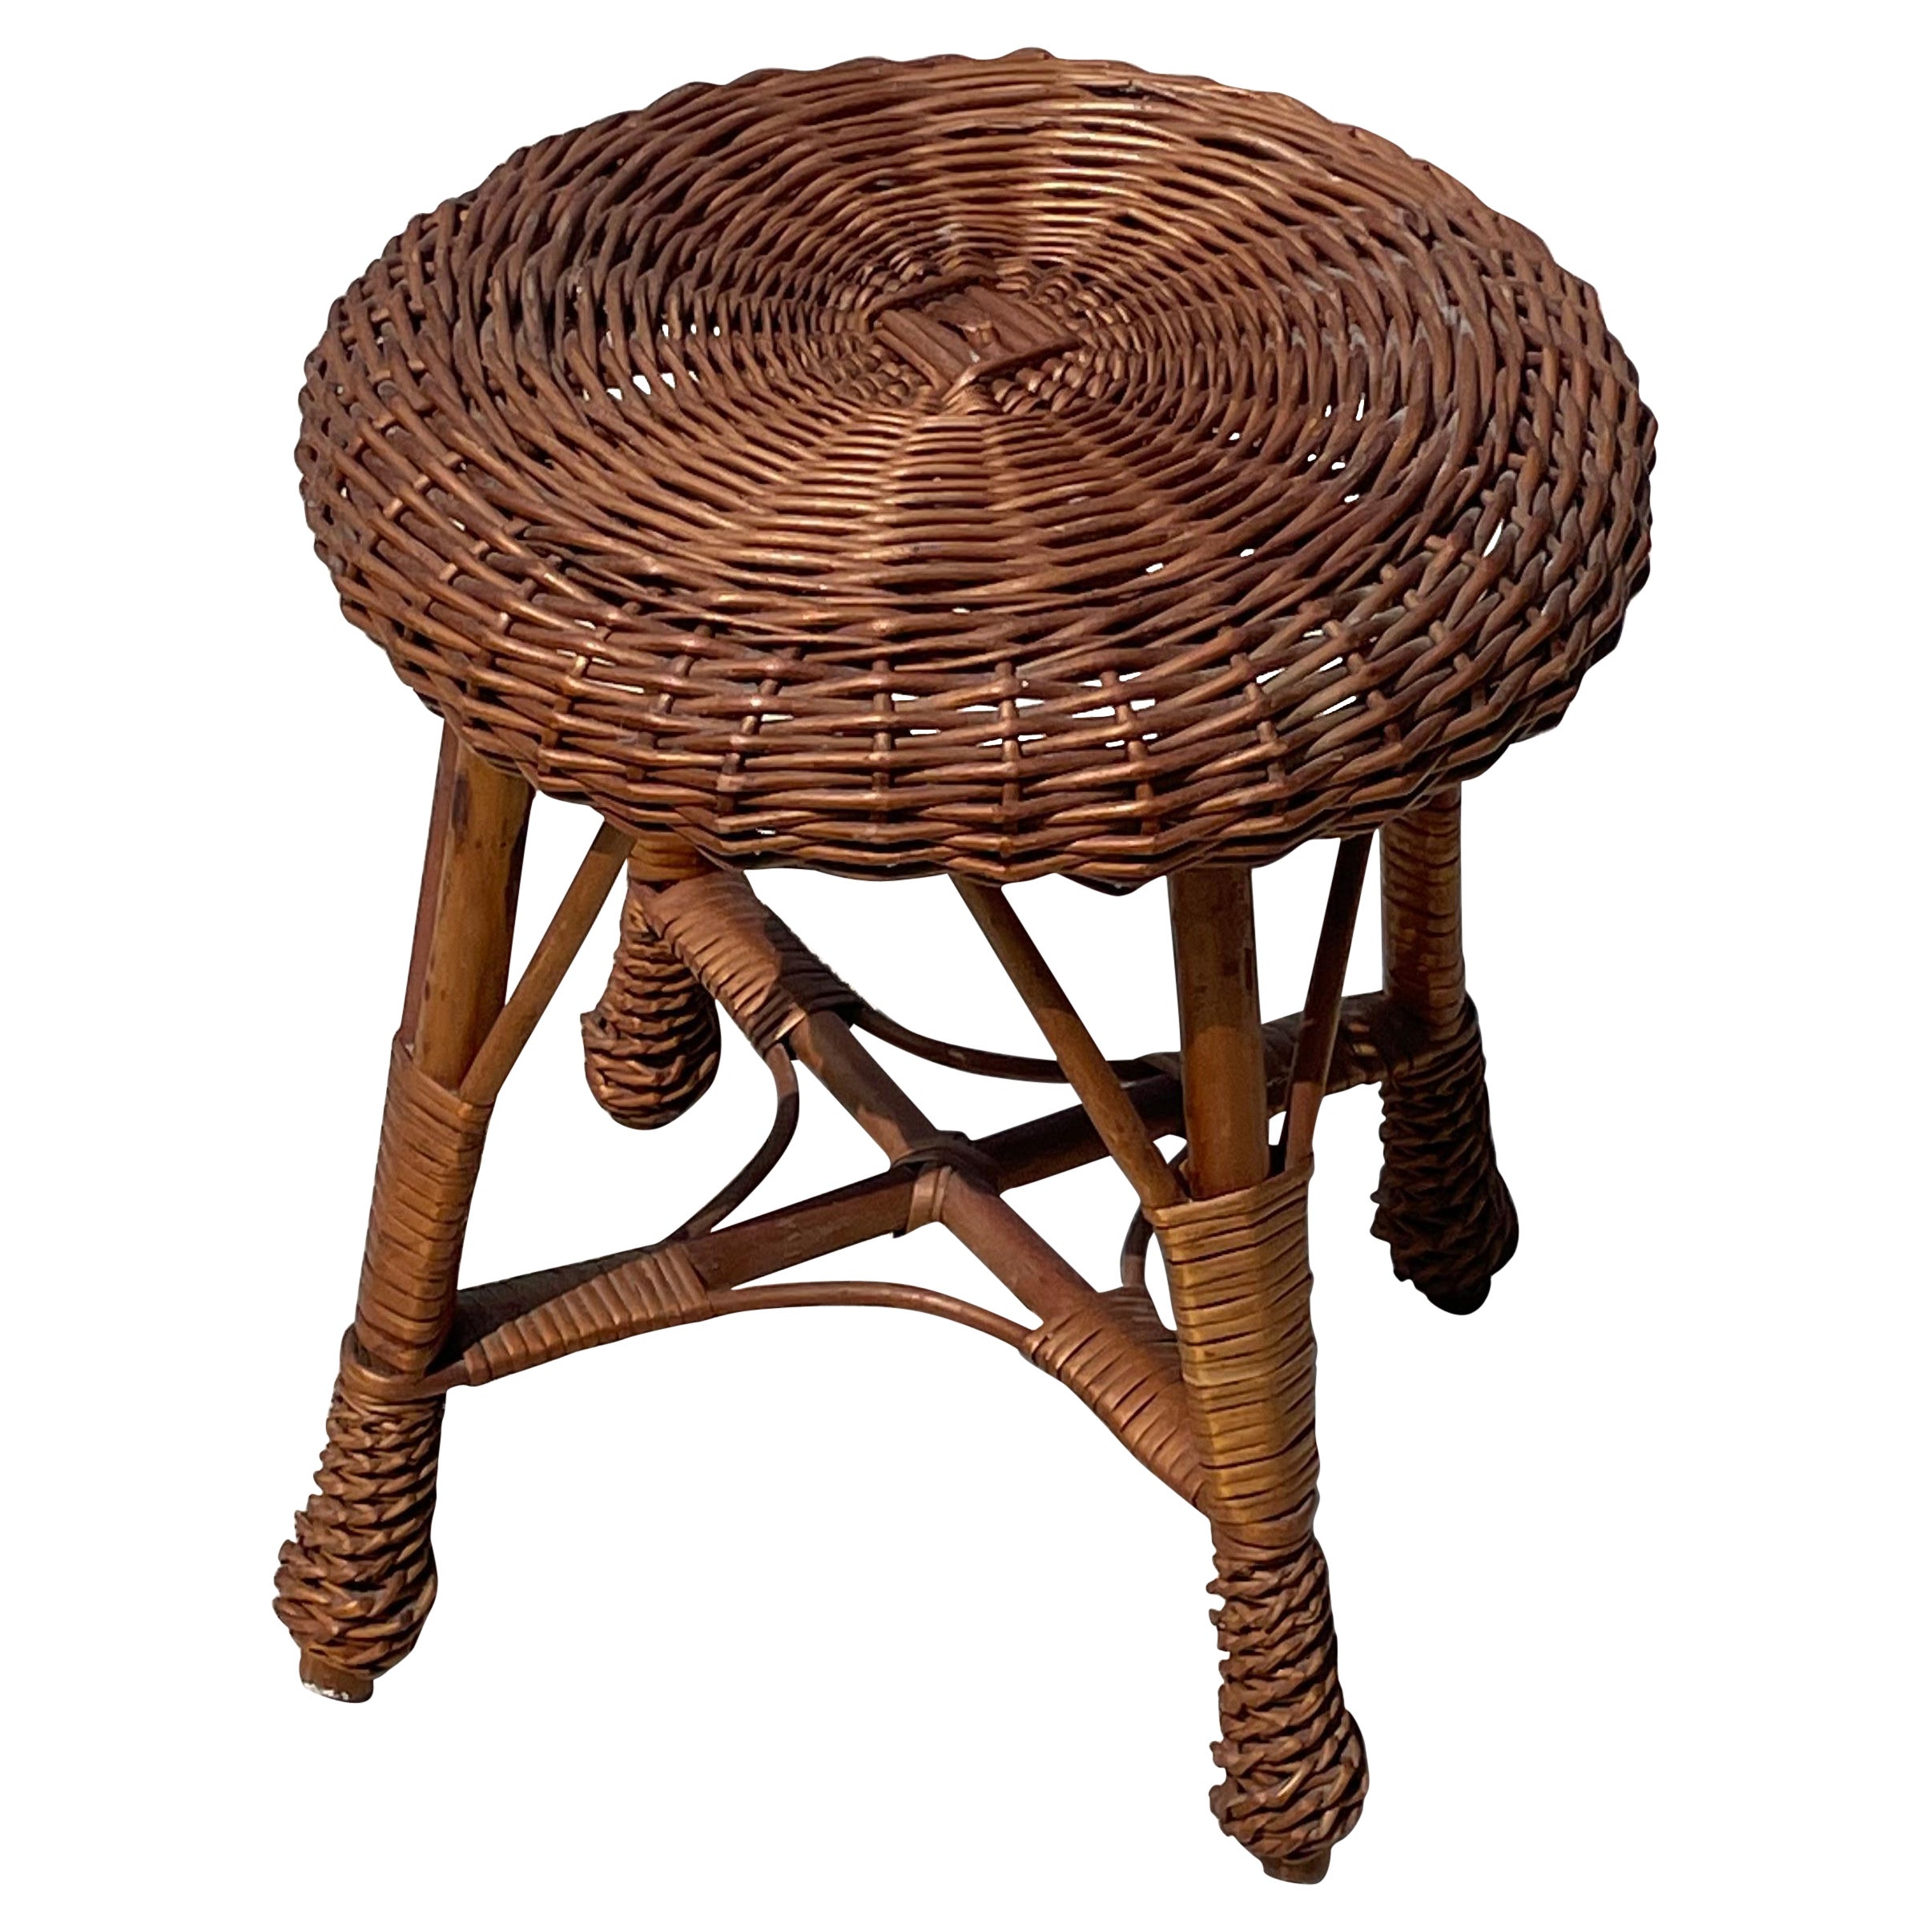 Bamboo and Wicker Stool, Style of Tony Paul and Franco Albini